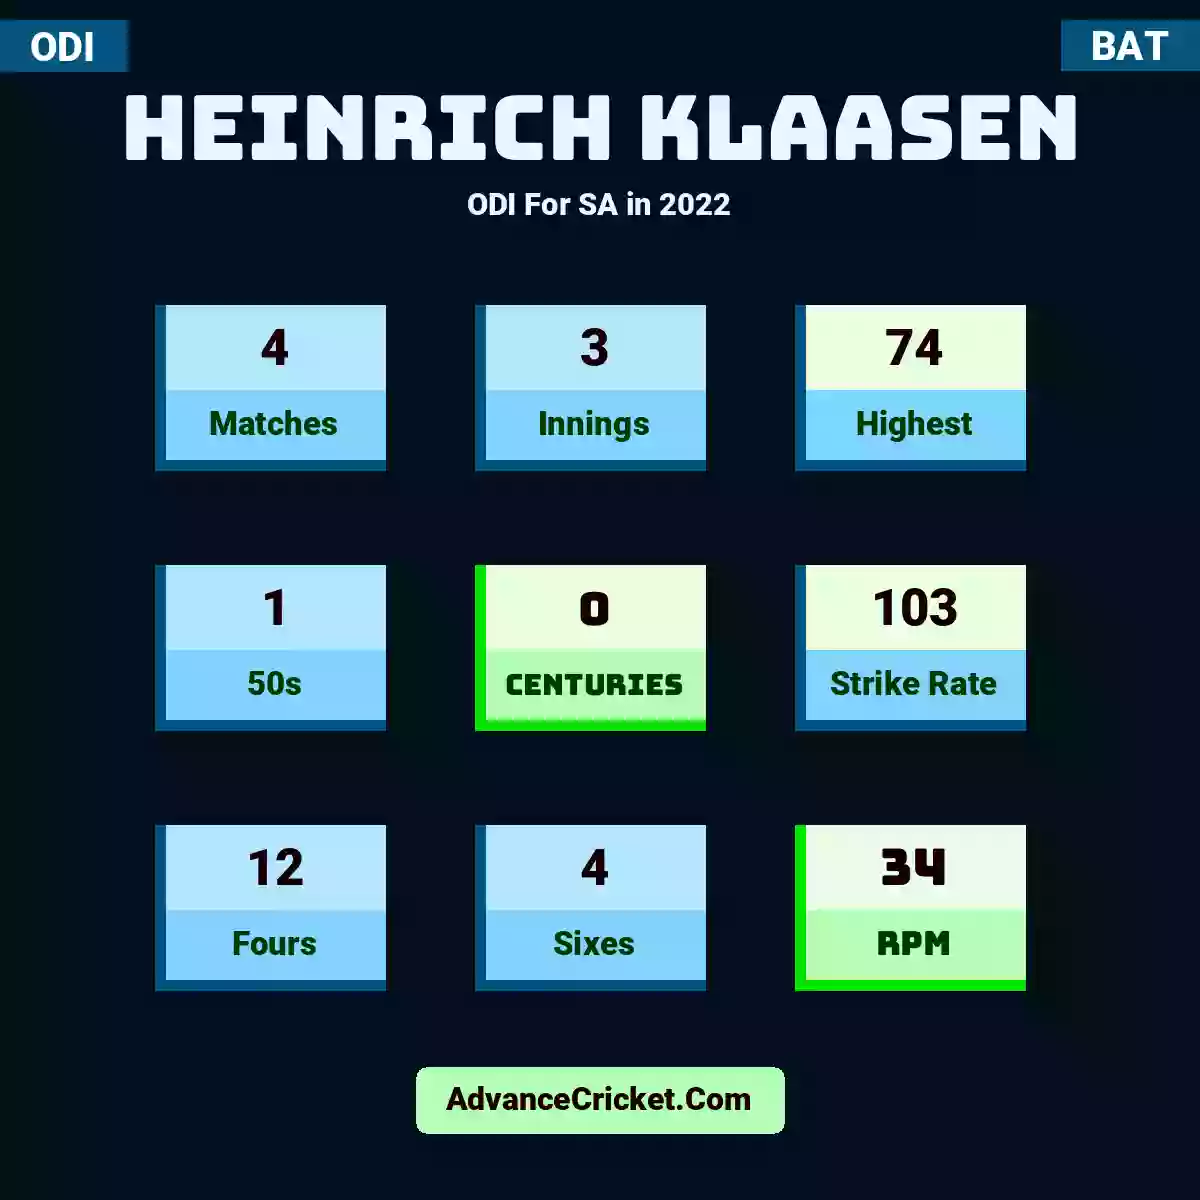 Heinrich Klaasen ODI  For SA in 2022, Heinrich Klaasen played 4 matches, scored 74 runs as highest, 1 half-centuries, and 0 centuries, with a strike rate of 103. H.Klaasen hit 12 fours and 4 sixes, with an RPM of 34.